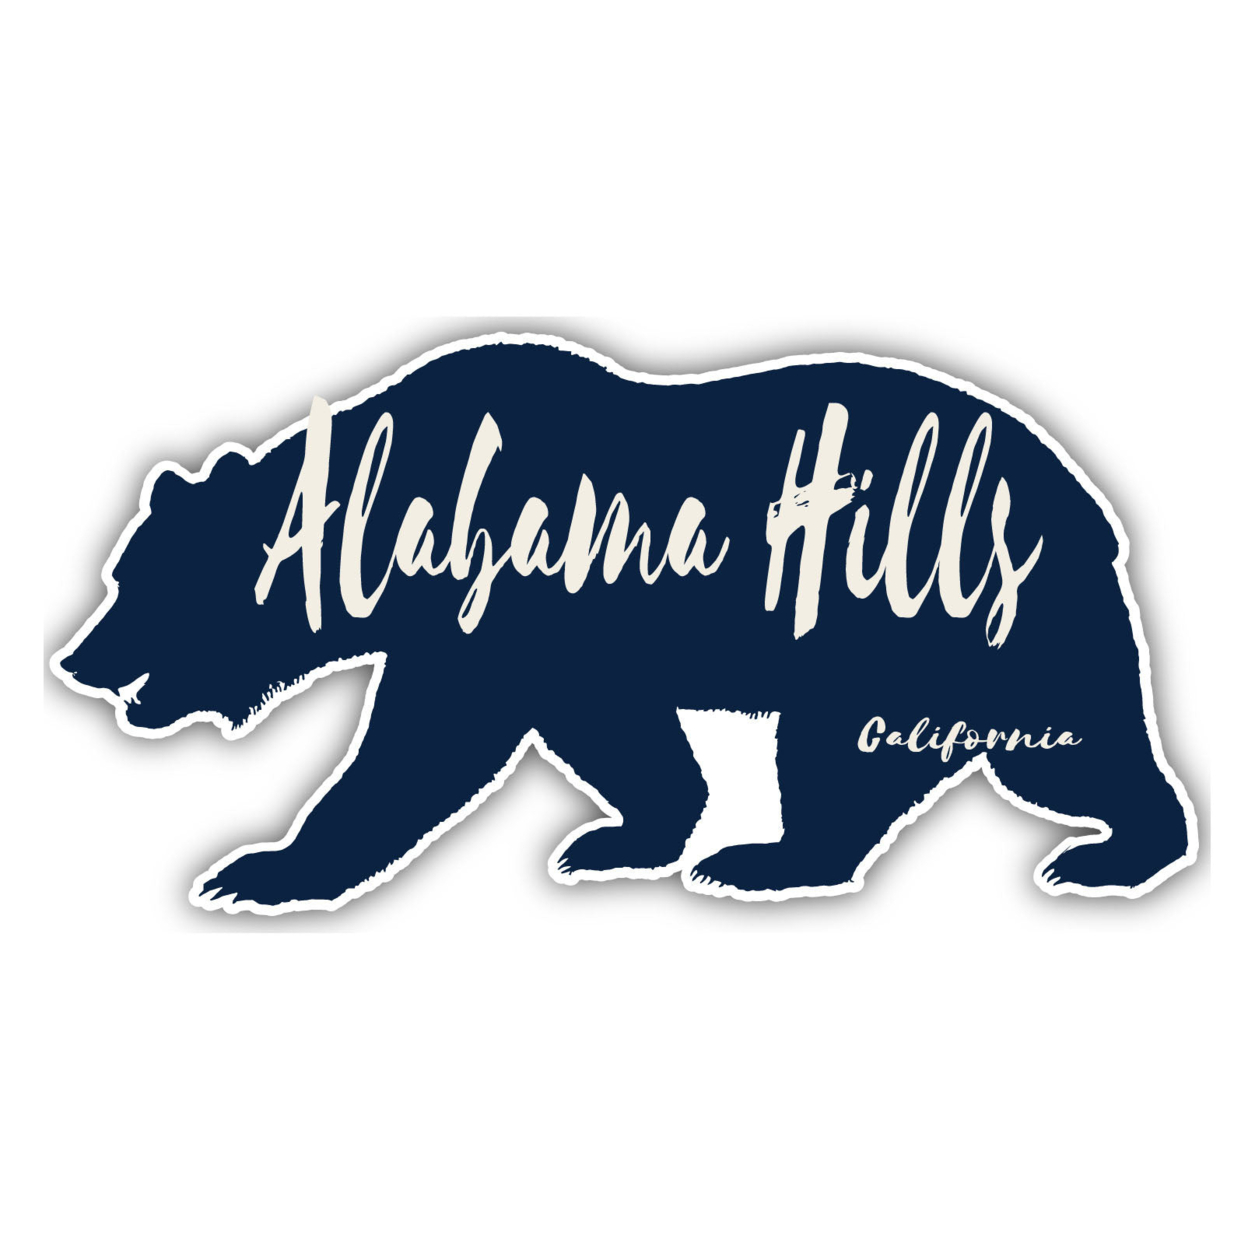 Alabama Hills California Souvenir Decorative Stickers (Choose Theme And Size) - Single Unit, 6-Inch, Great Outdoors